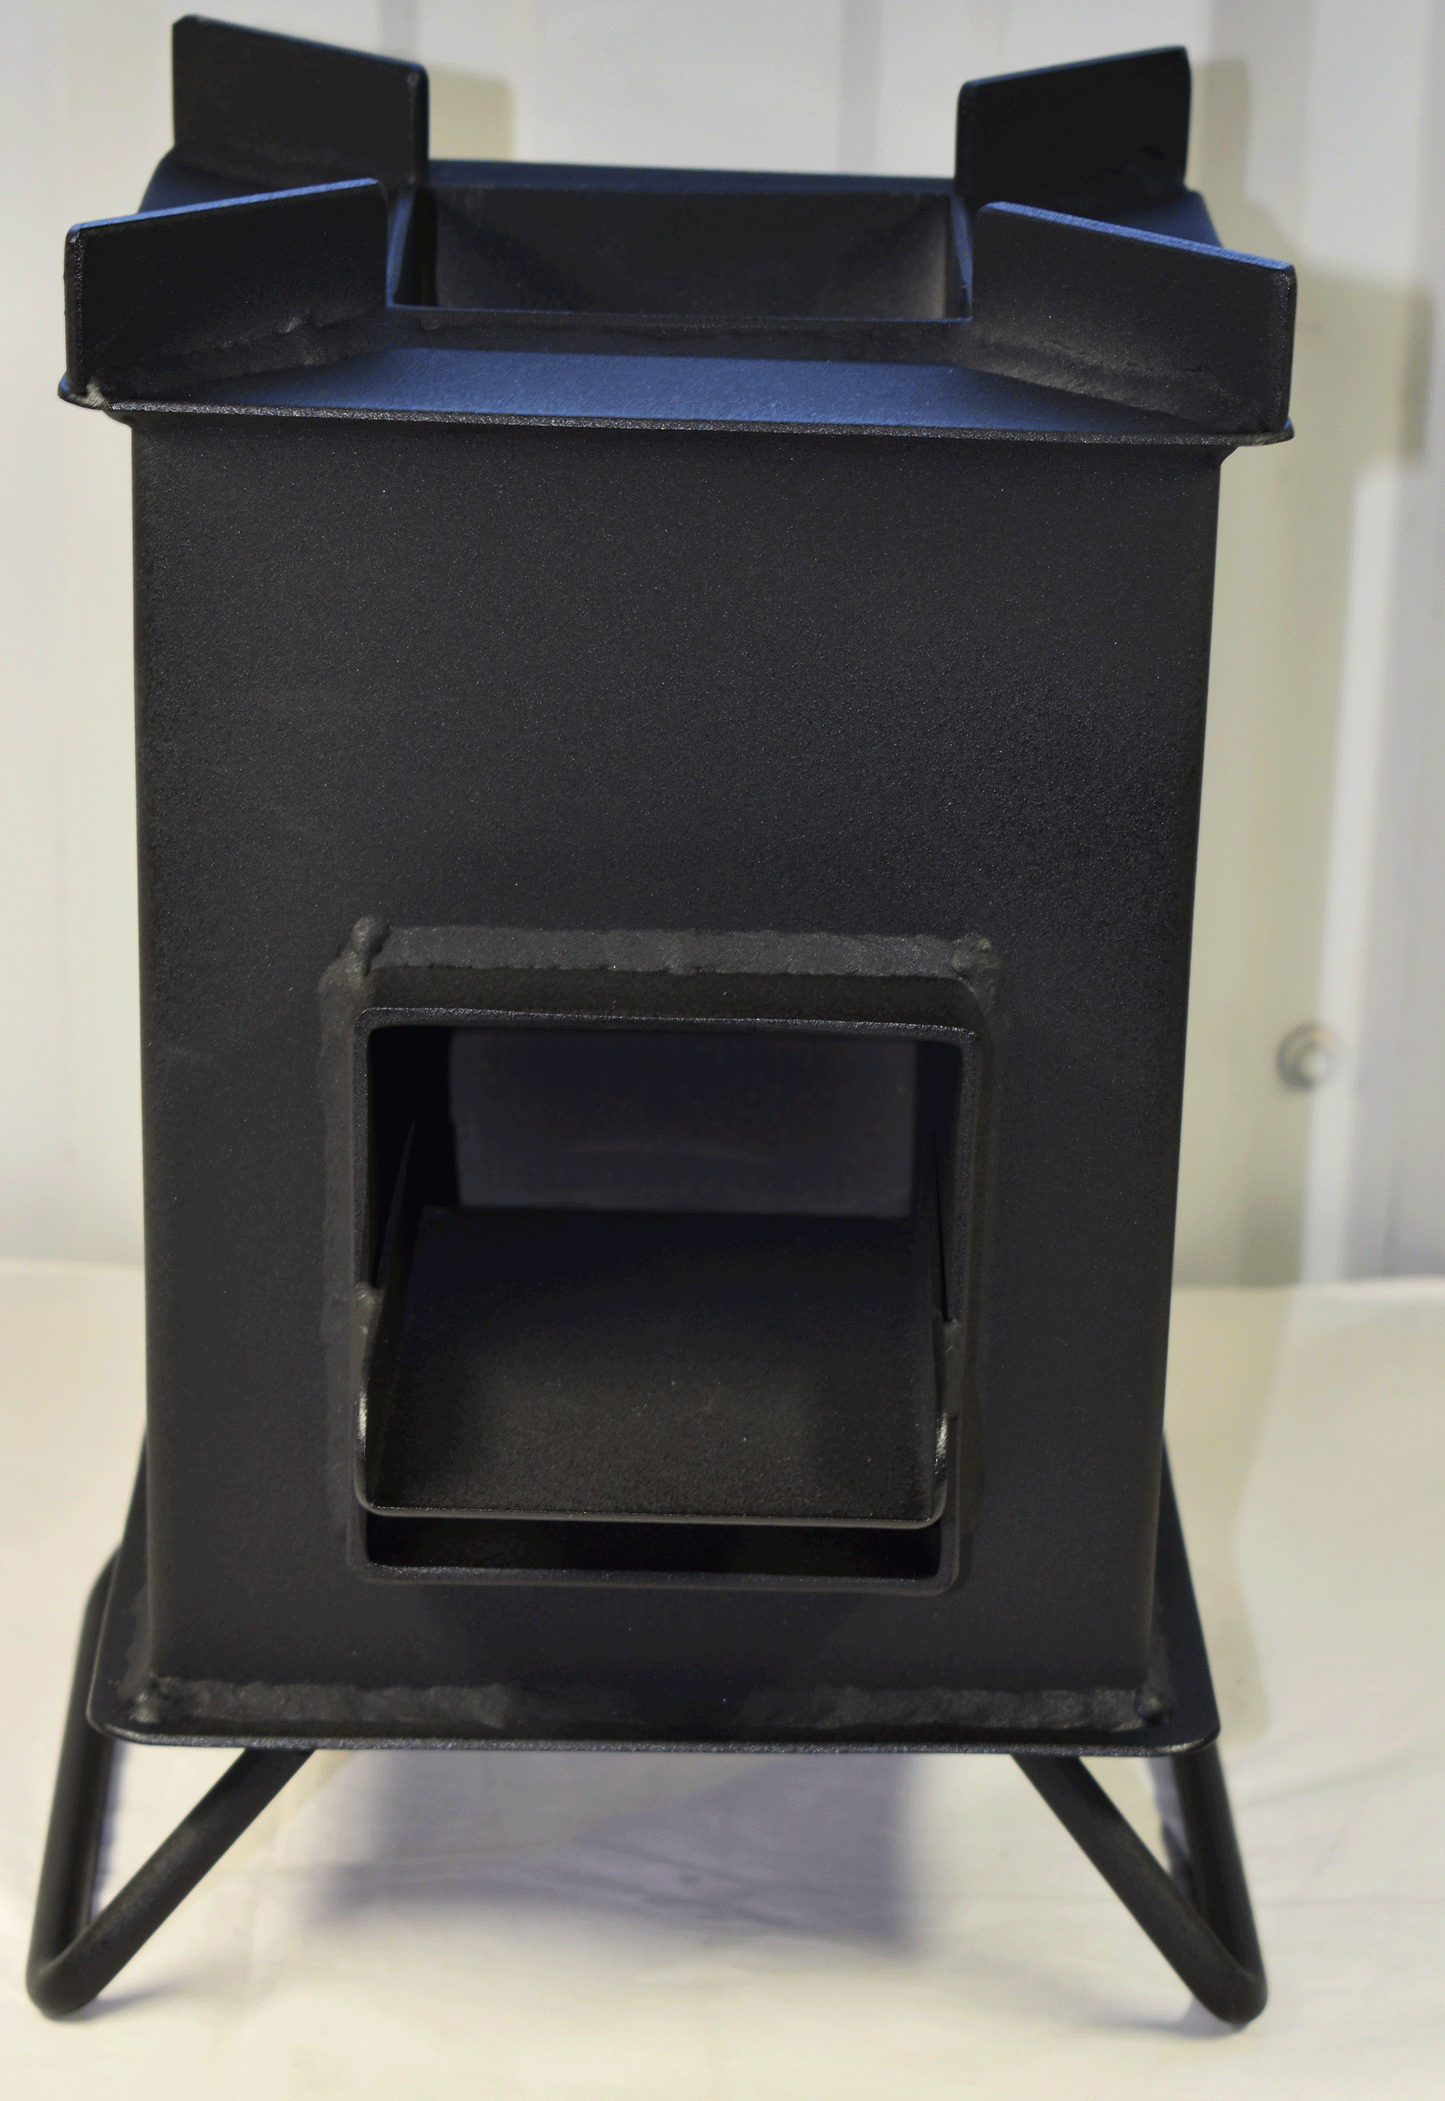 Heavy Duty Insulated Stove with Charcoal Briquette Insert - BeReadyFoods.com